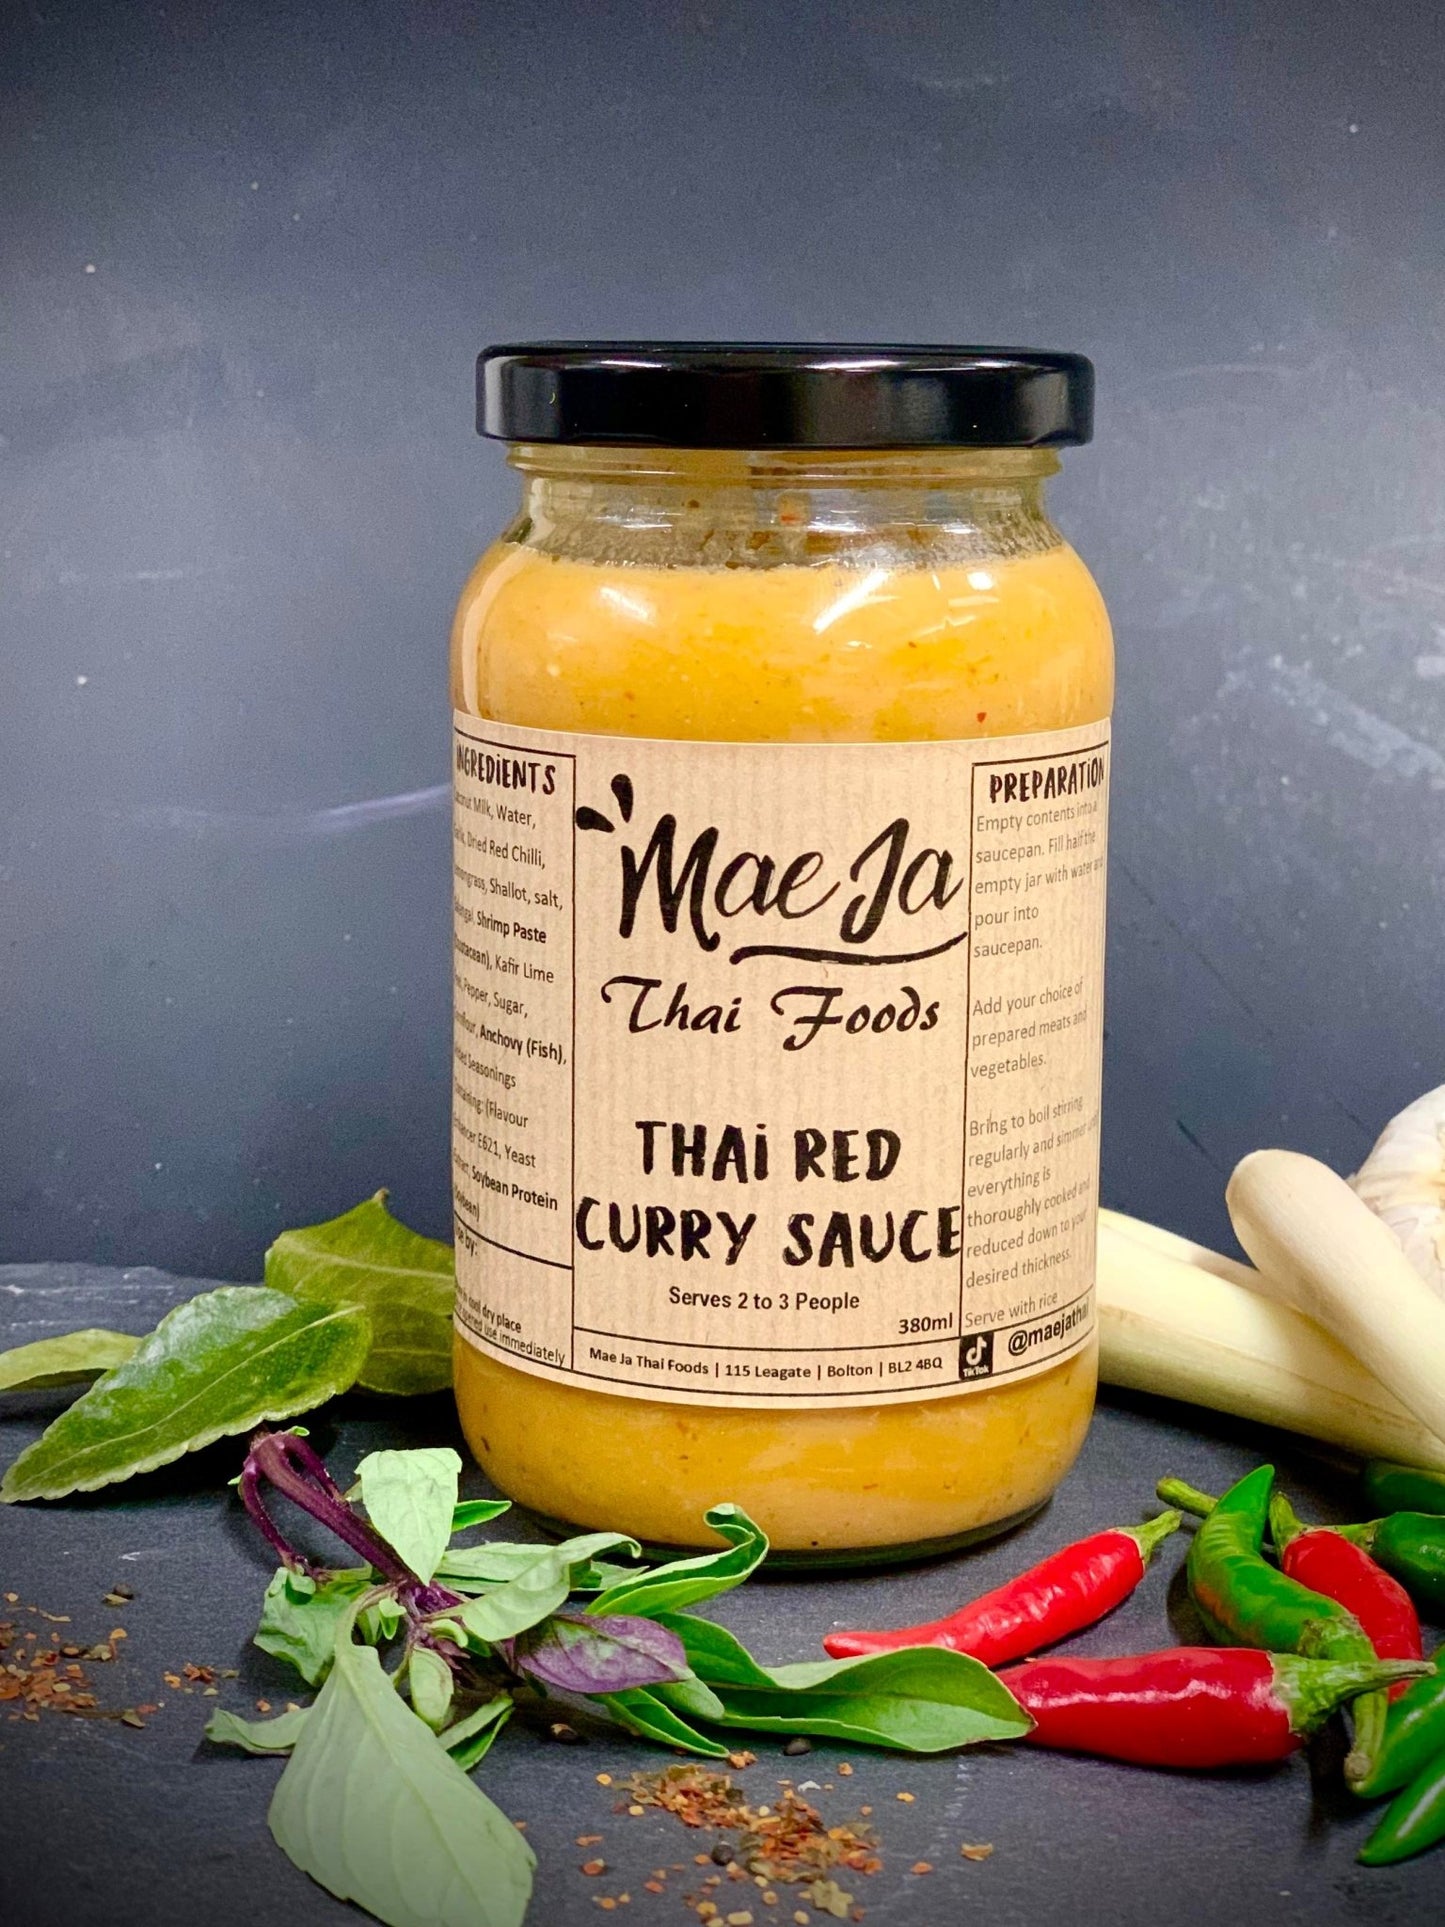 Thai Red Curry Sauce Buy Online by Mae Ja